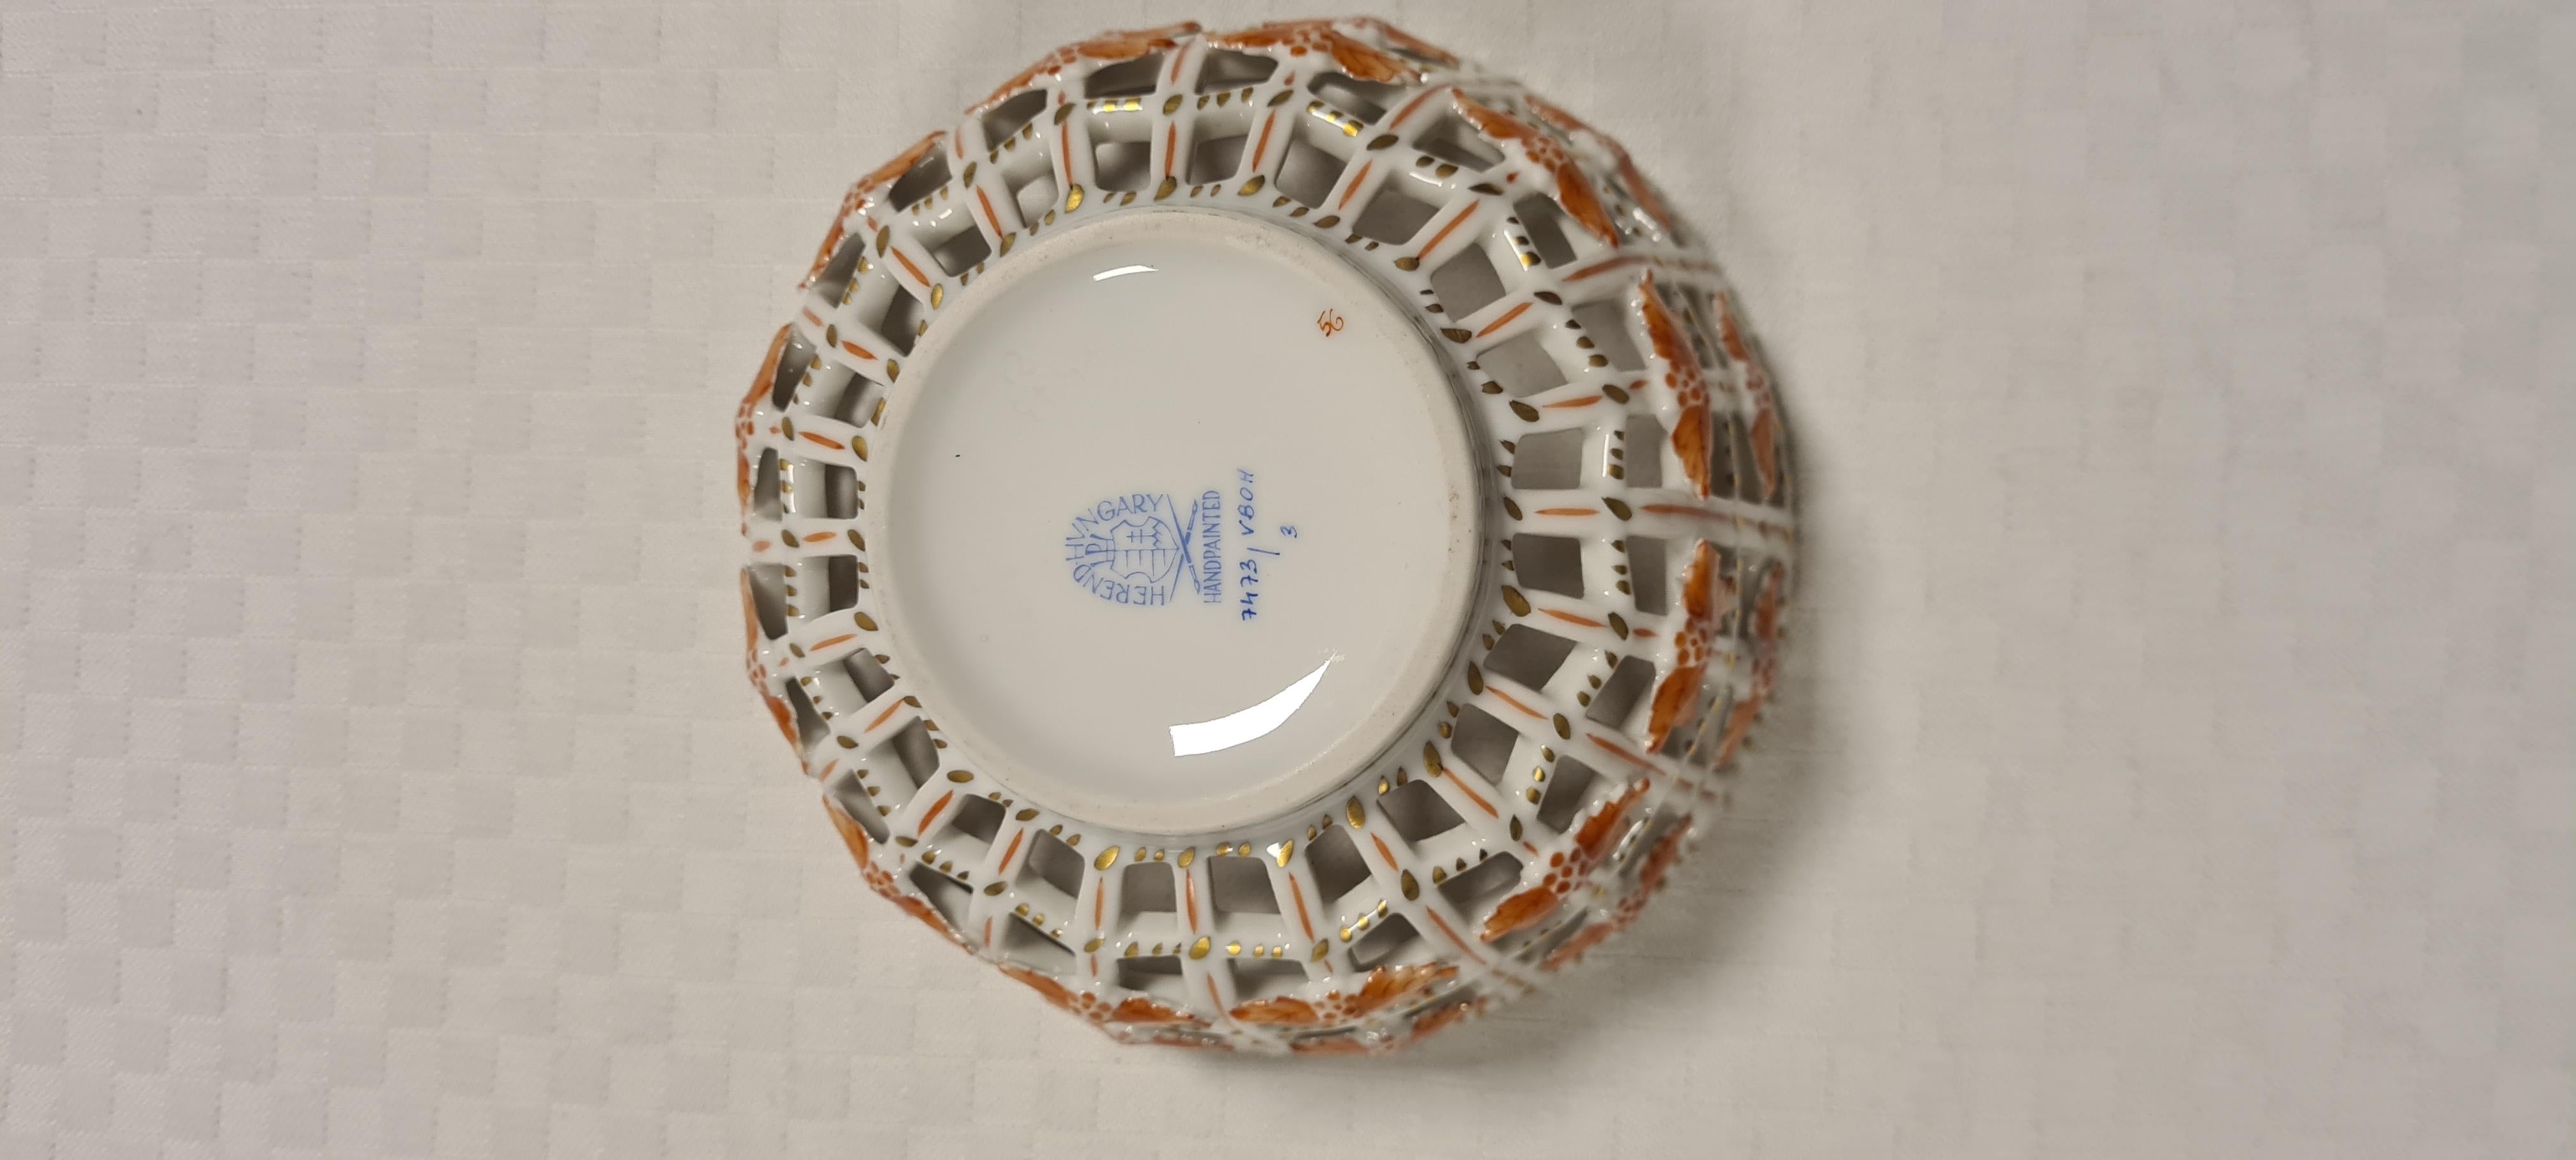 Porcelain basket from Herend Hungary For Sale 1